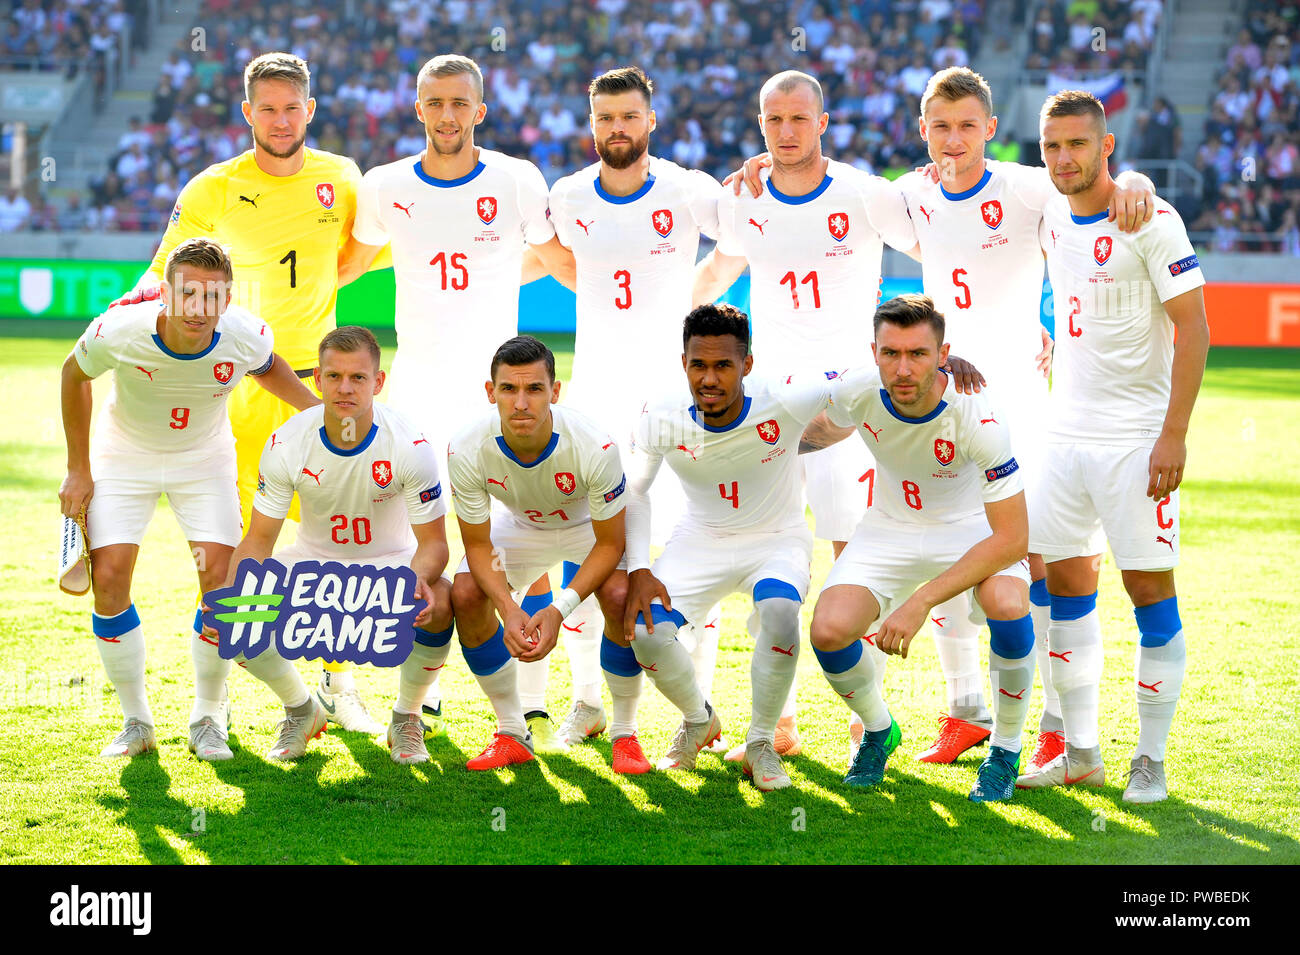 Trnava, Slovakia. 13th Oct, 2018. Soccer players of Czech Republic pose for  photographers prior to the Nations League match B1 Czech Republic vs.  Slovakia in Trnava, Slovensko, October 13, 2018. Credit: Vaclav